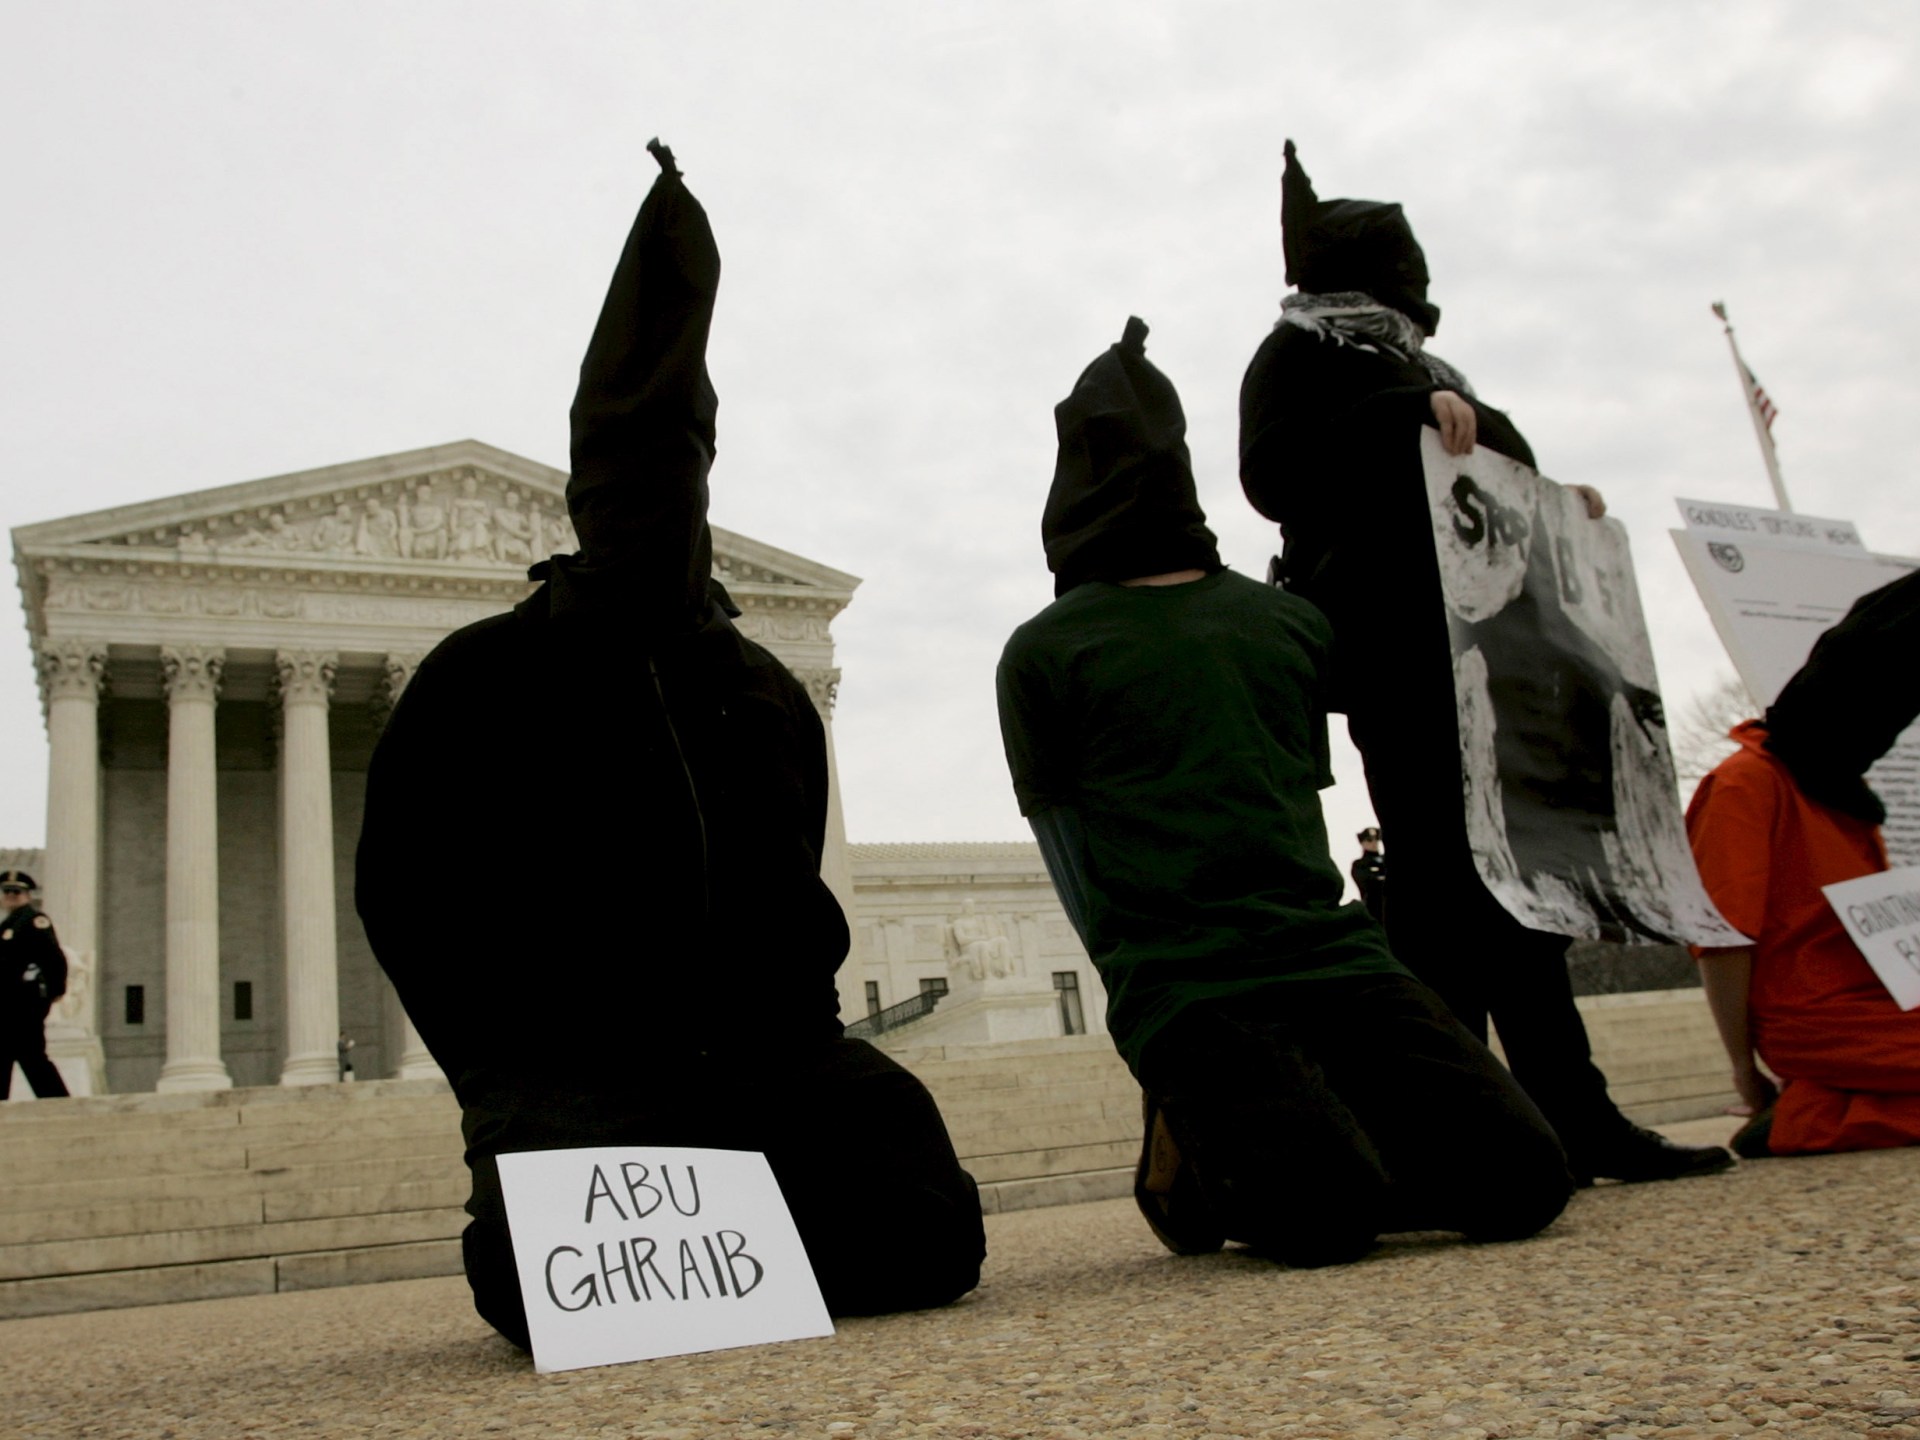 The Abu Ghraib case is an important milestone for justice | Opinions